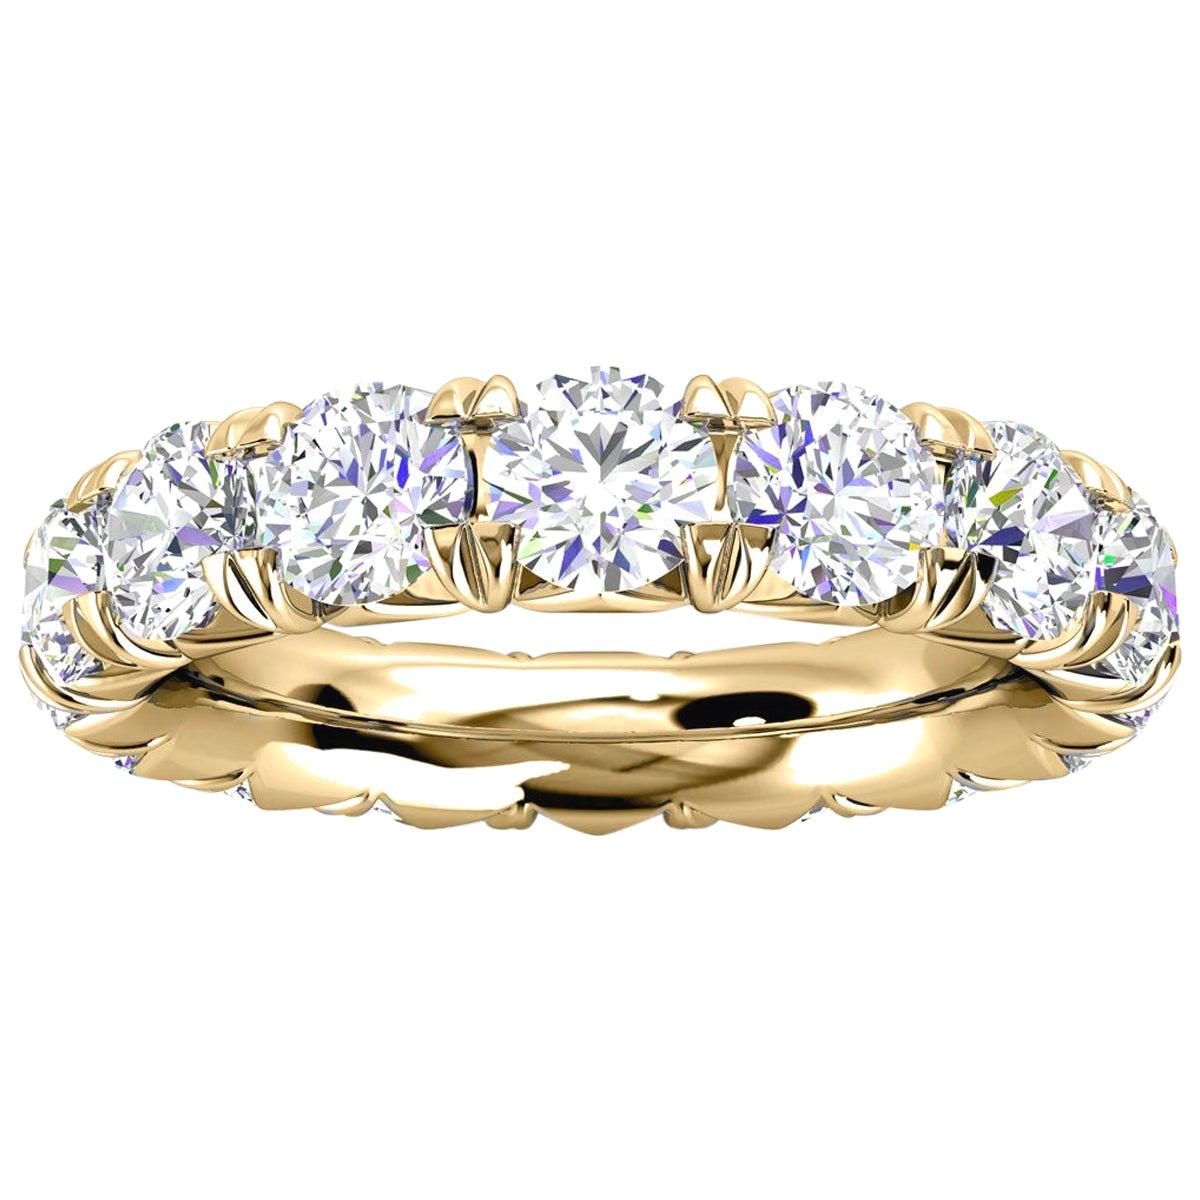 For Sale:  14k Yellow Gold Mia French Pave Diamond Eternity Ring '4 Ct. Tw'